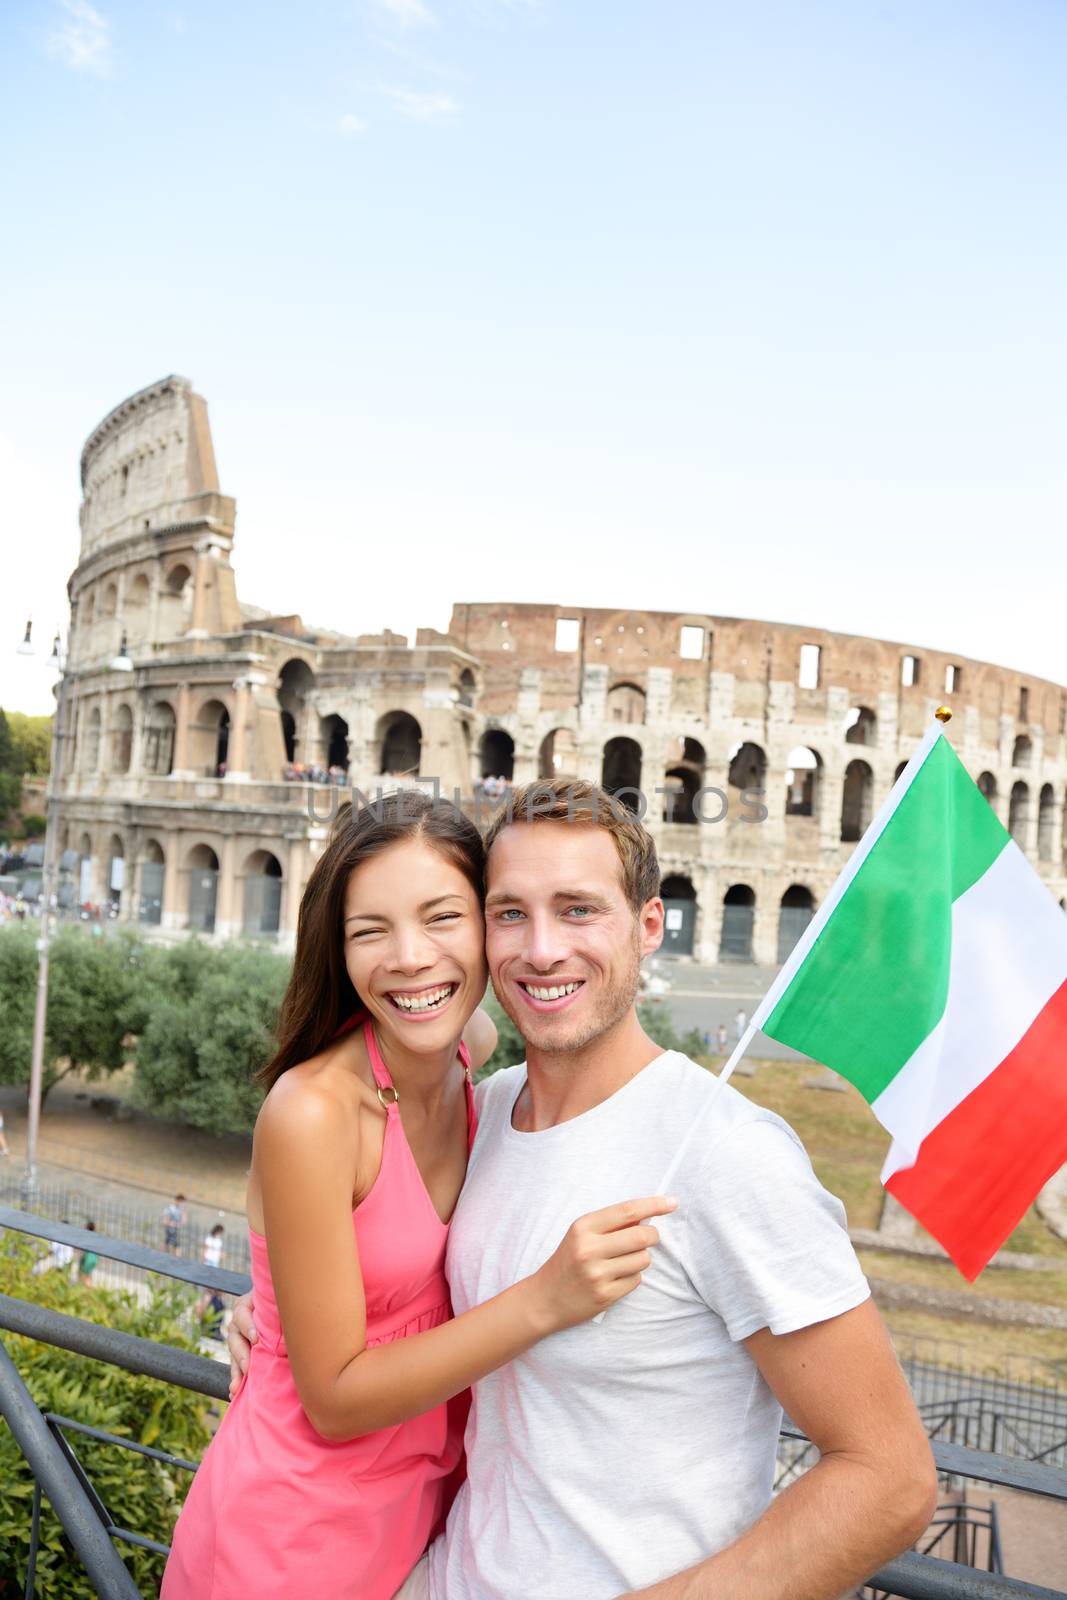 Happy tourists in front of Coliseum, Rome, Italy by Maridav